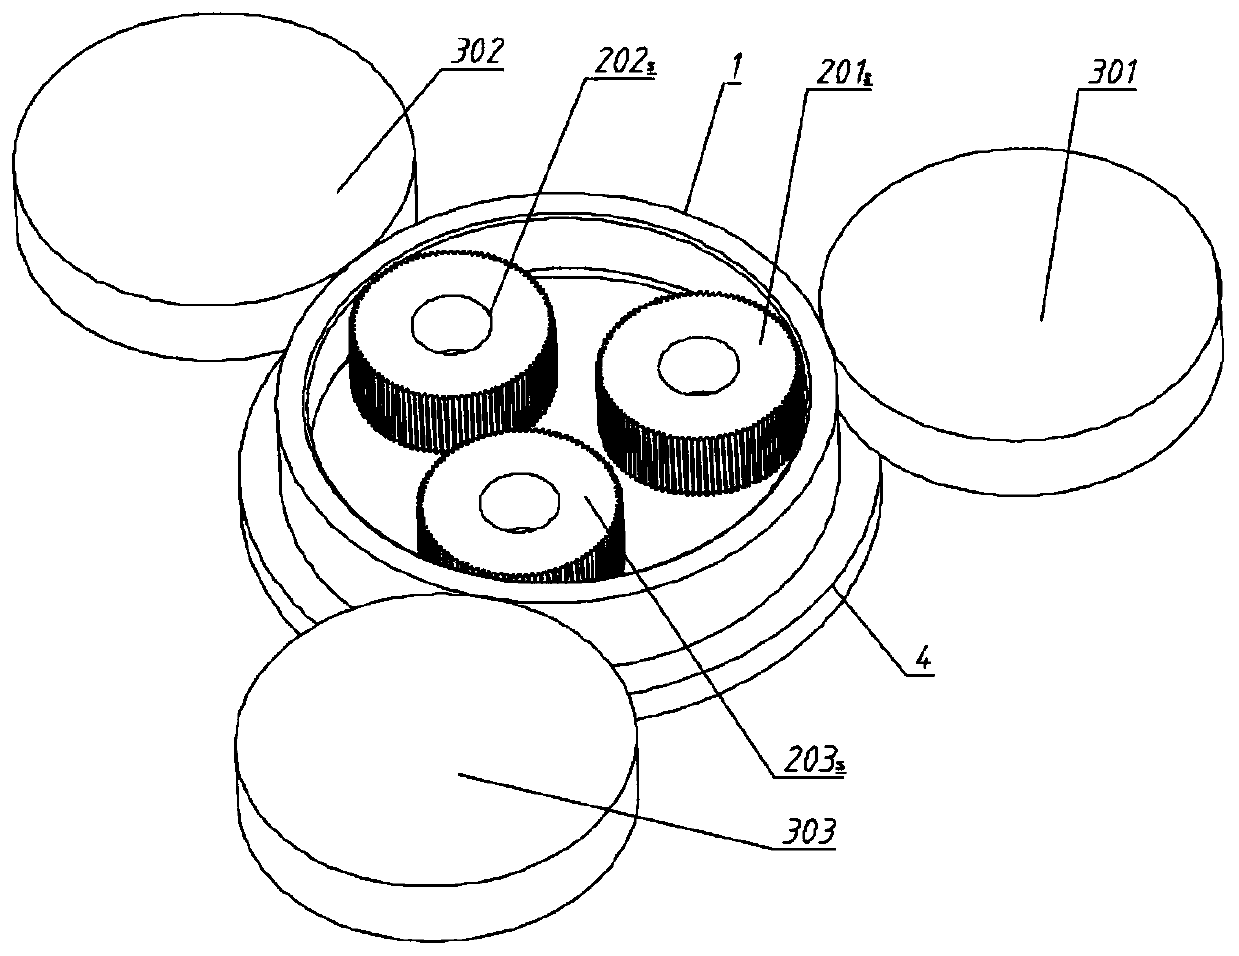 A multi-die synchronous roll forming method for large-diameter internal gear parts